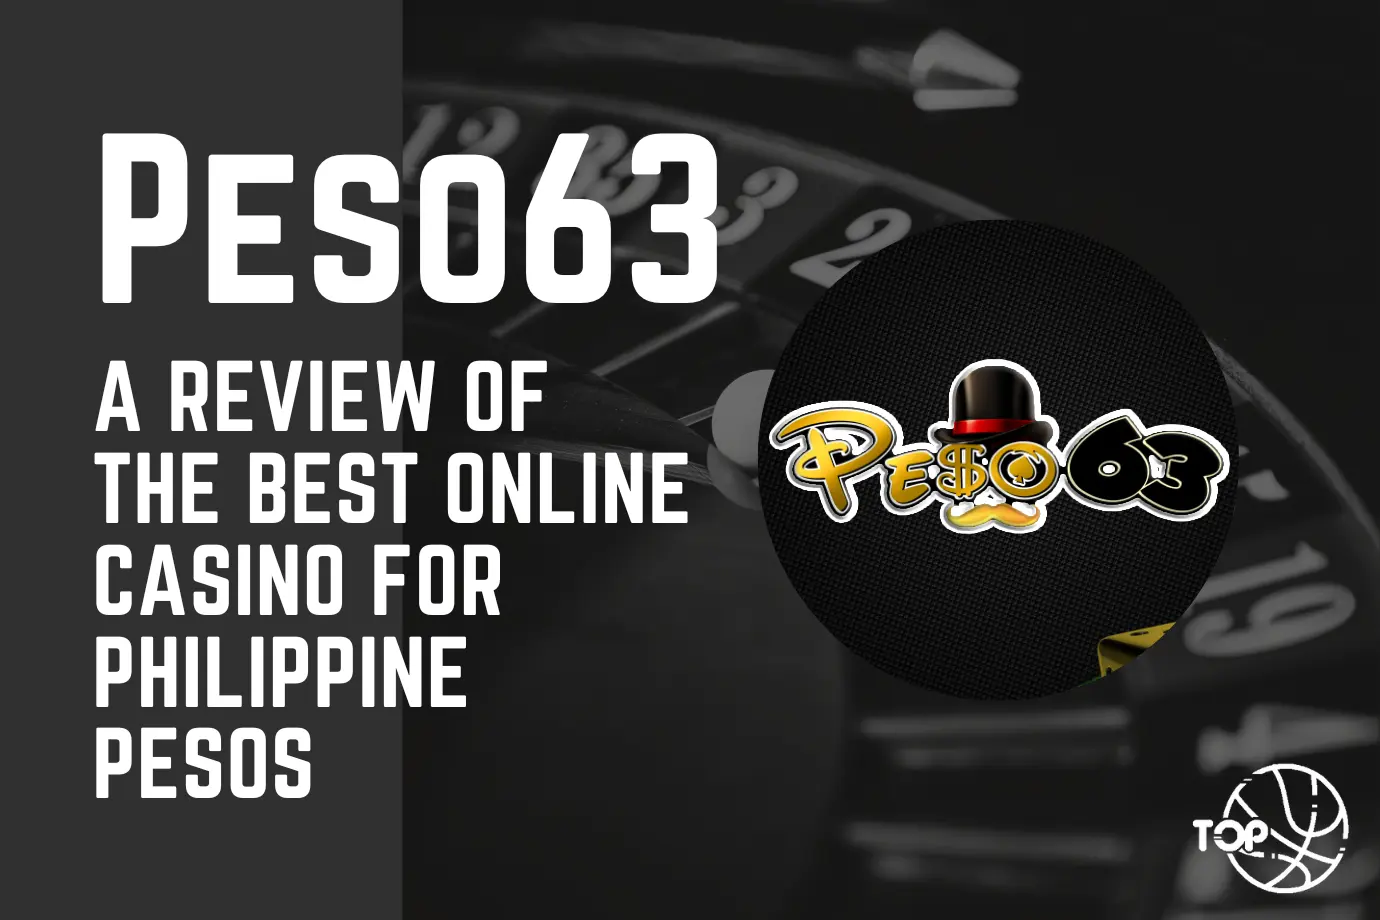 Peso63: A Review of The Best Online Casino for Philippine Pesos